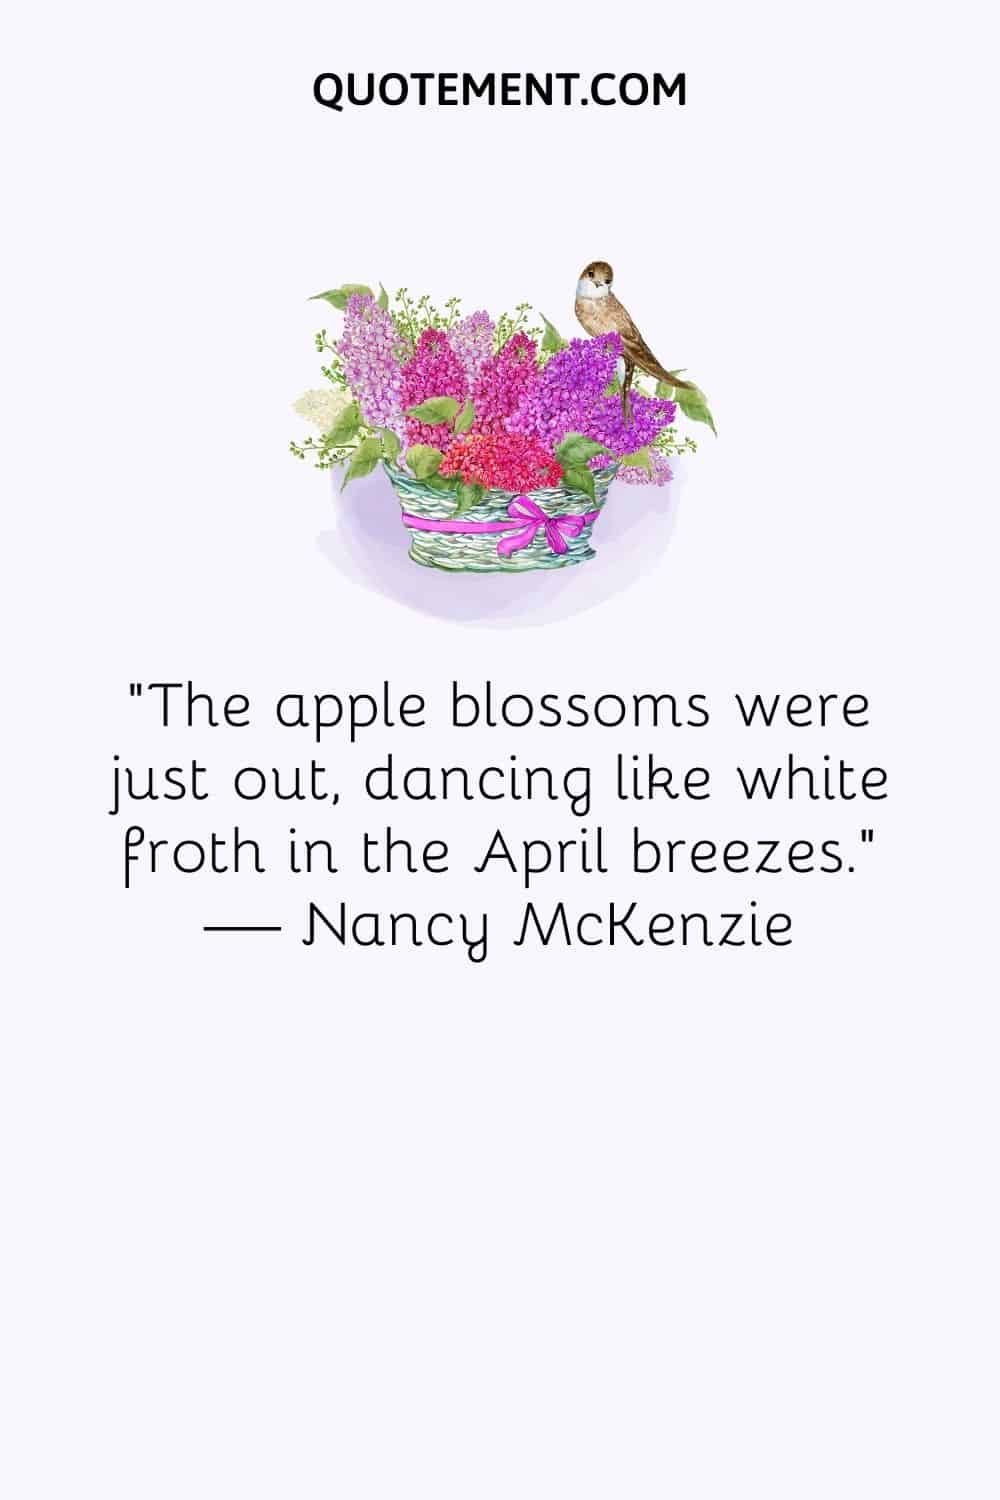 The apple blossoms were just out, dancing like white froth in the April breezes